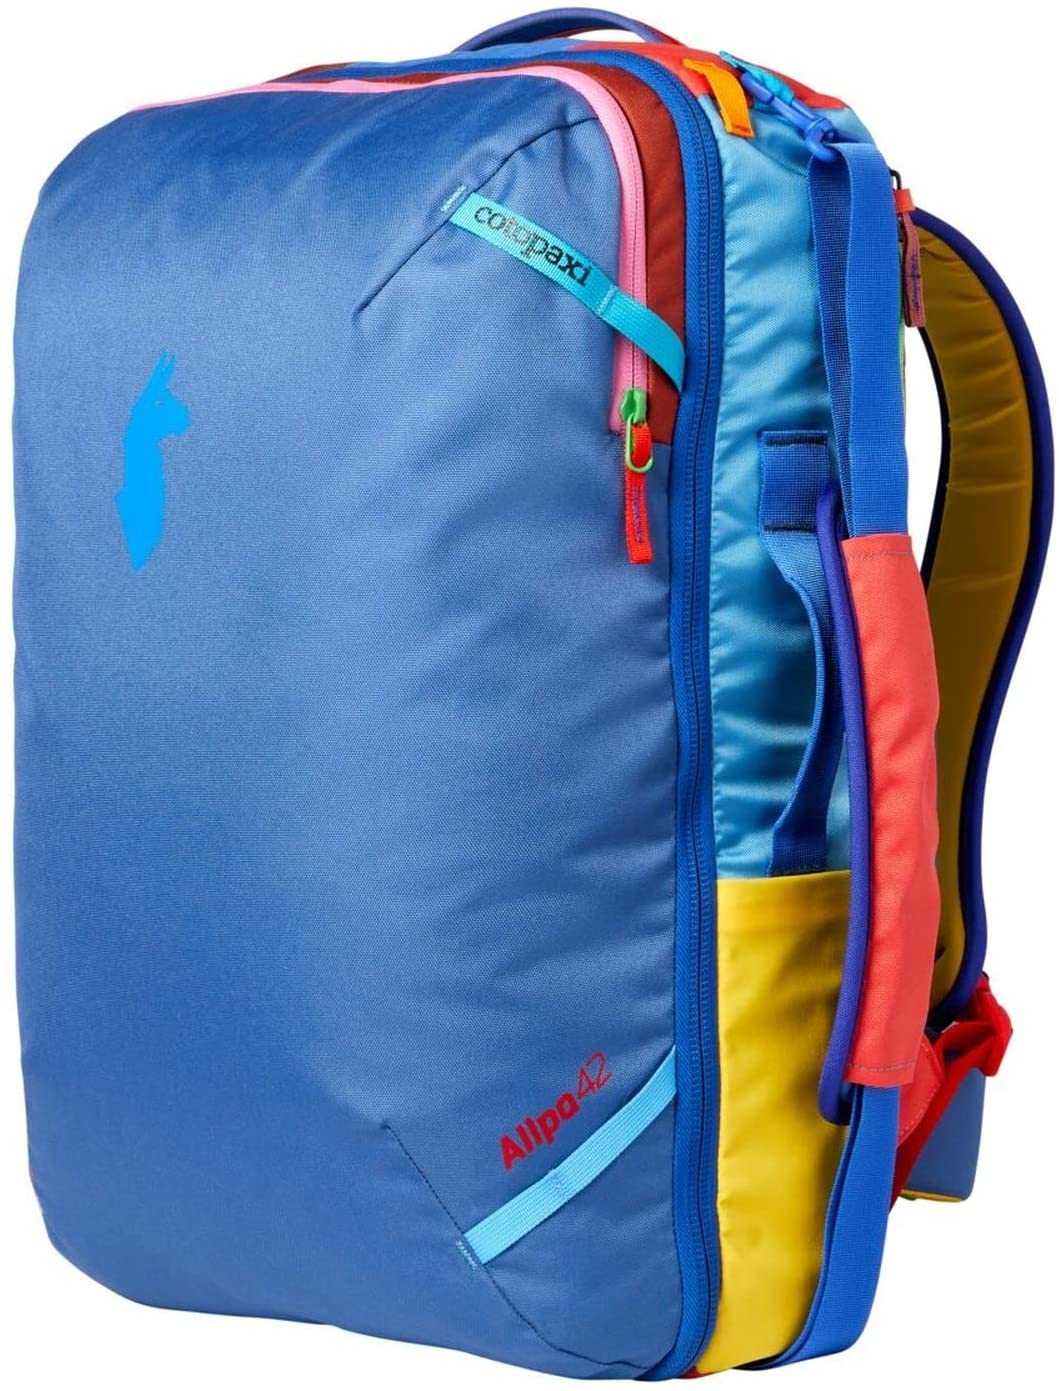 Cotopaxi Allpa 42L Travel Pack - Del Dia - One of a kind